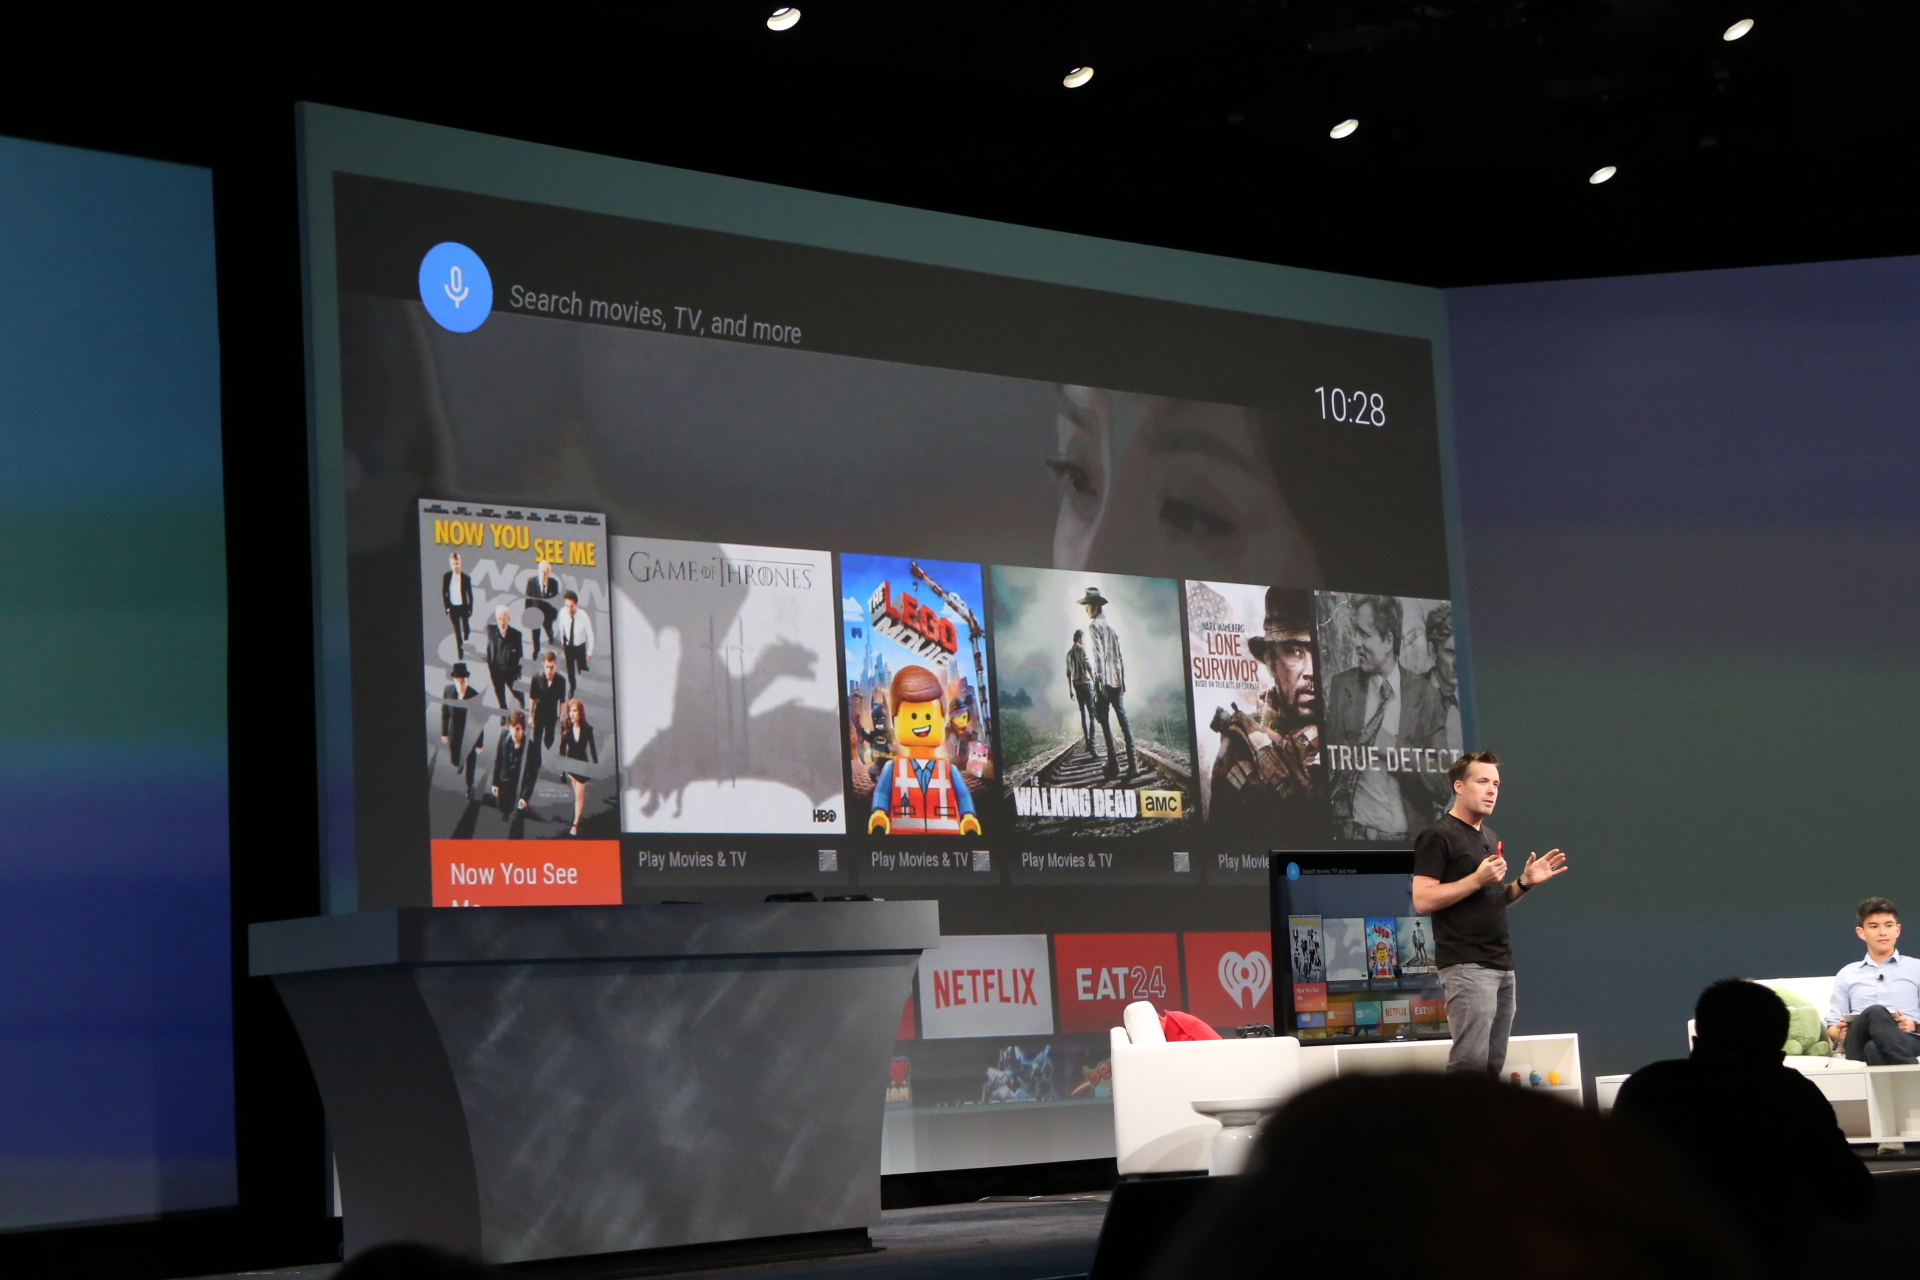 Google Android TV, Its New Platform For TV Apps And Navigation | TechCrunch